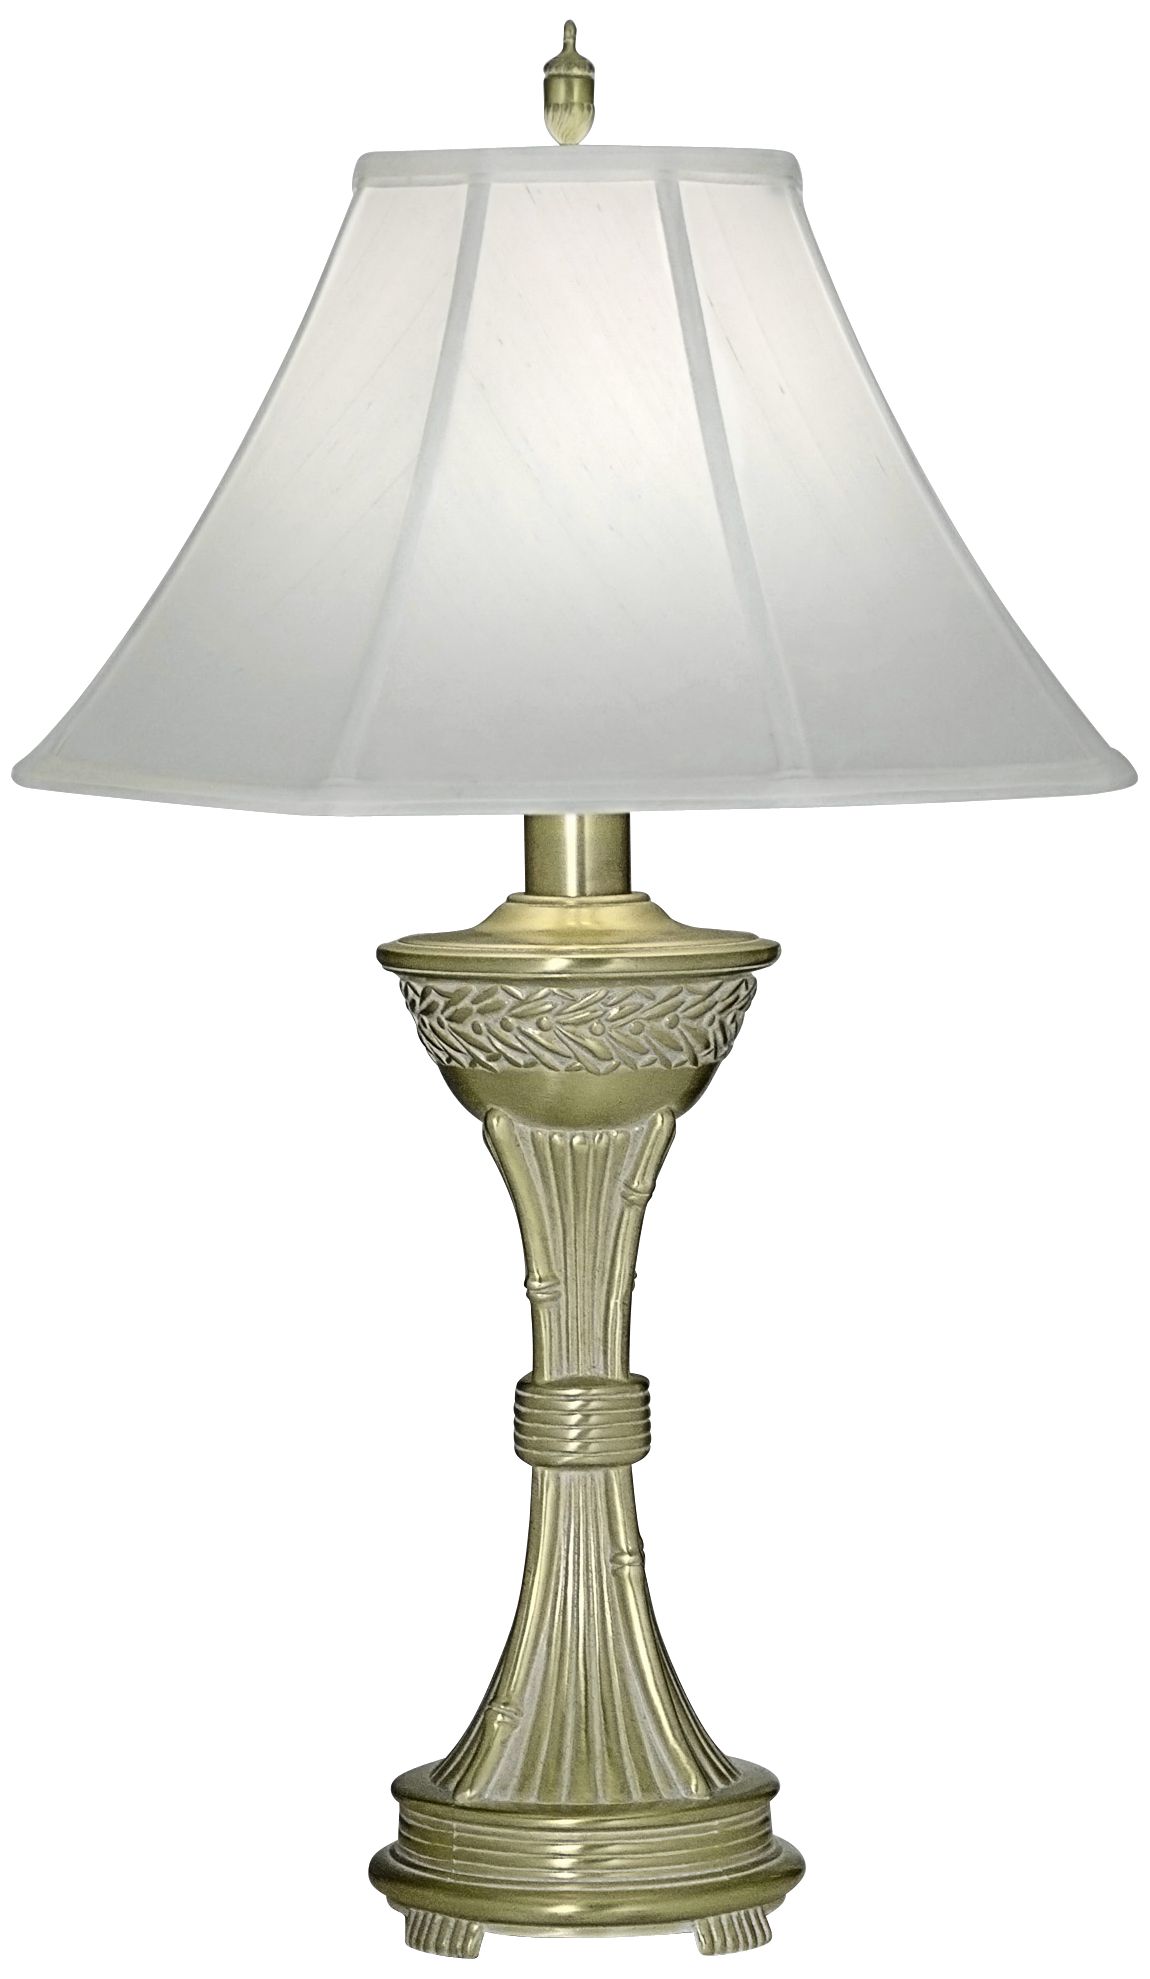 Stiffel White Antique And Satin Brass Table Lamp